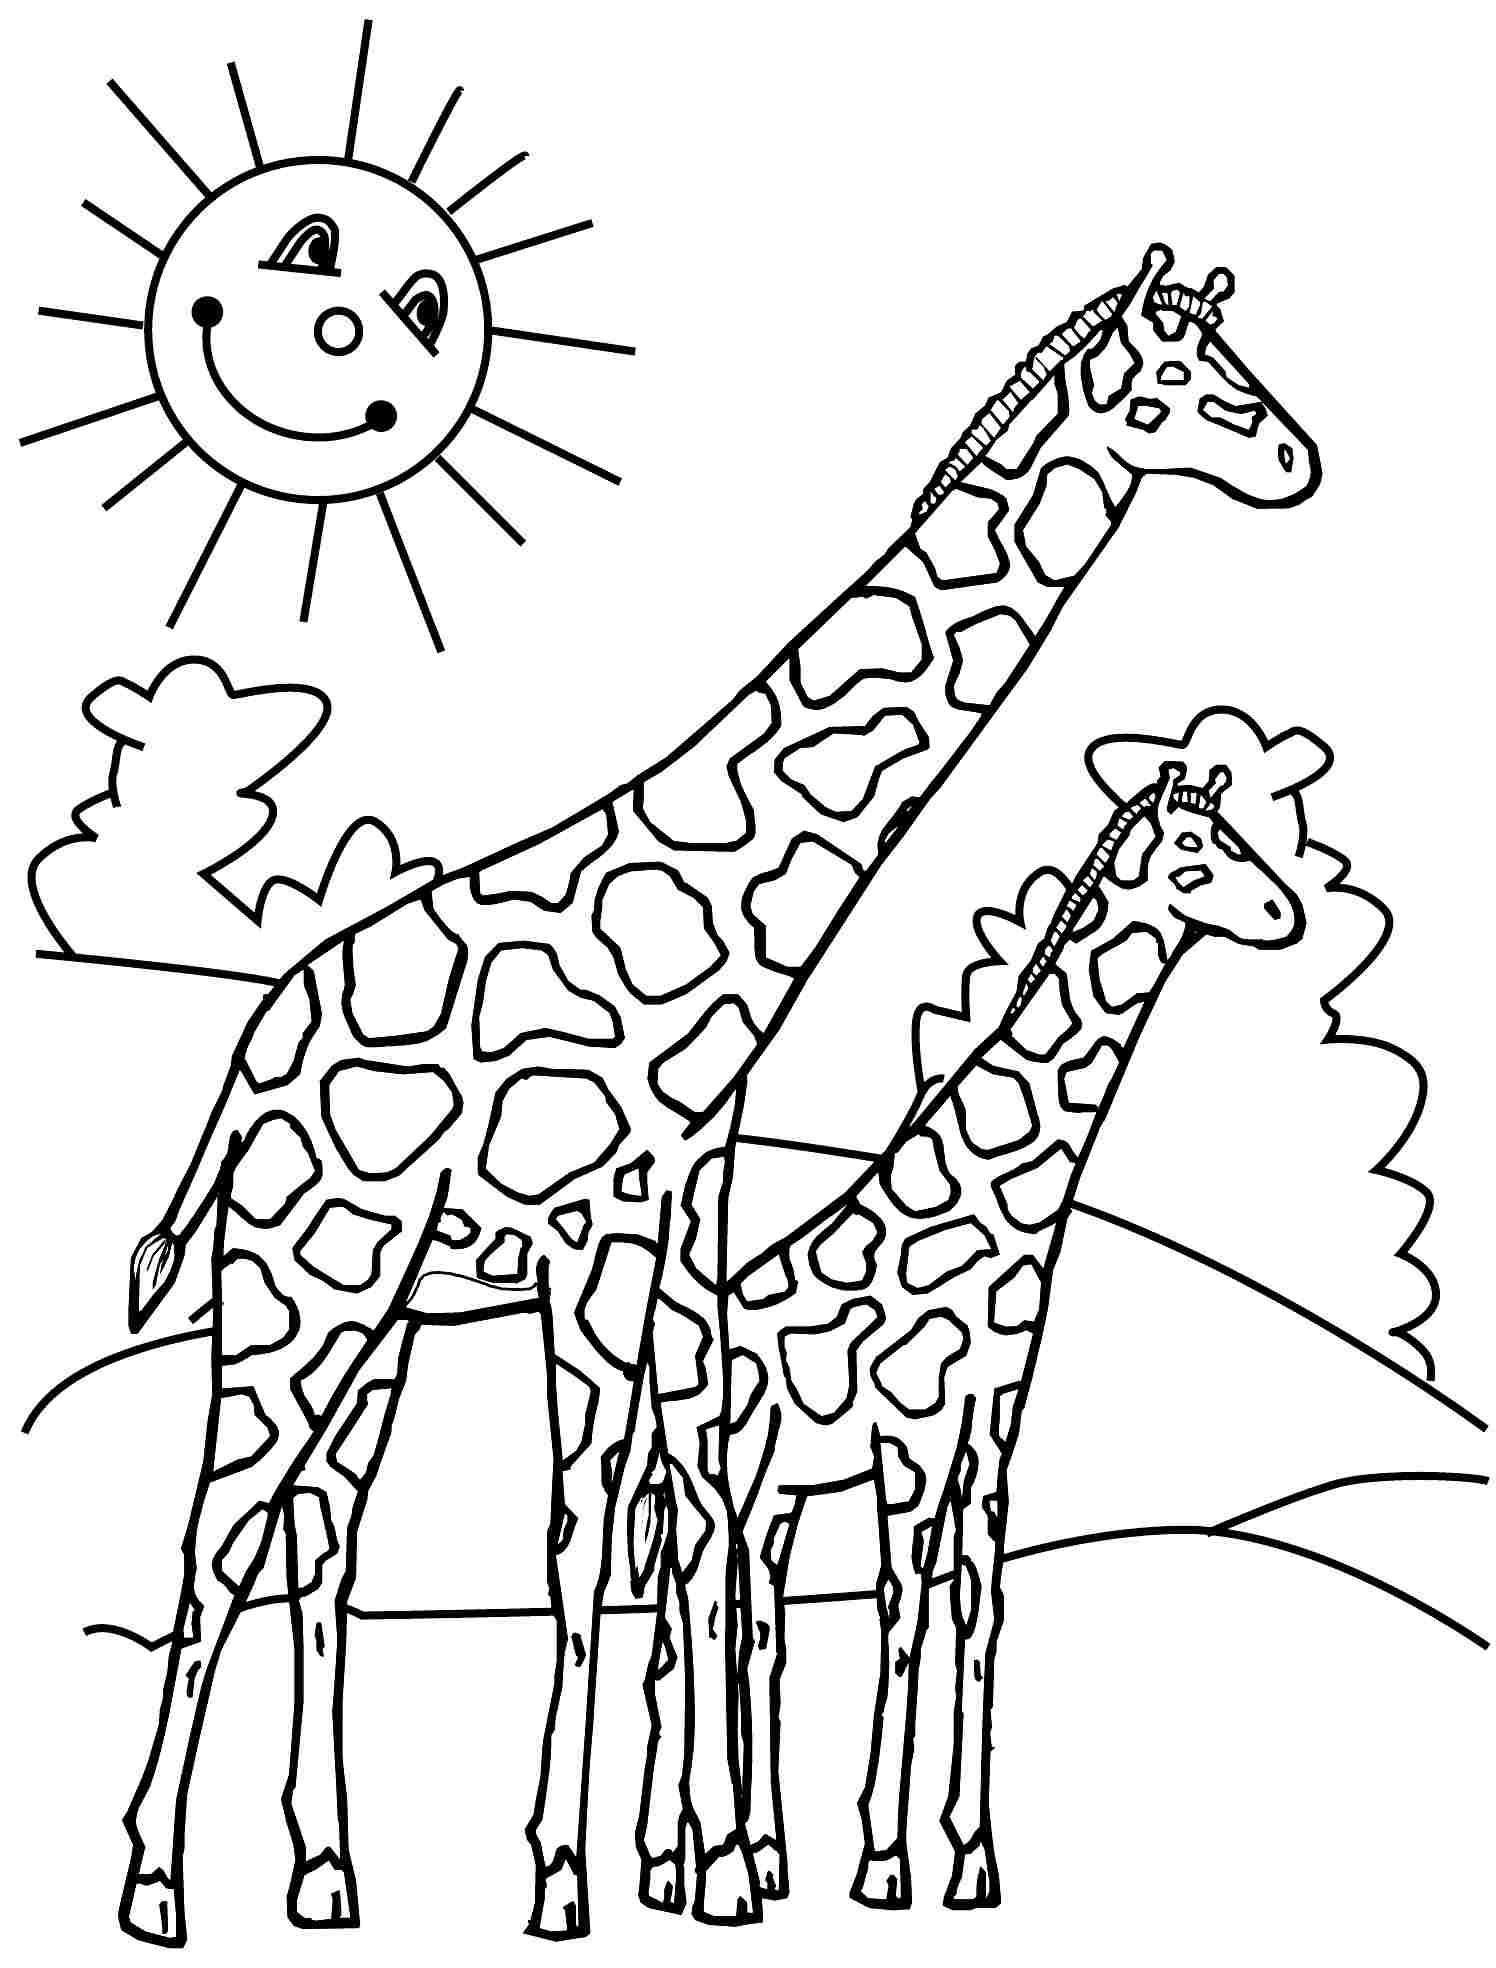 Giraffes coloring pages to download and print for free